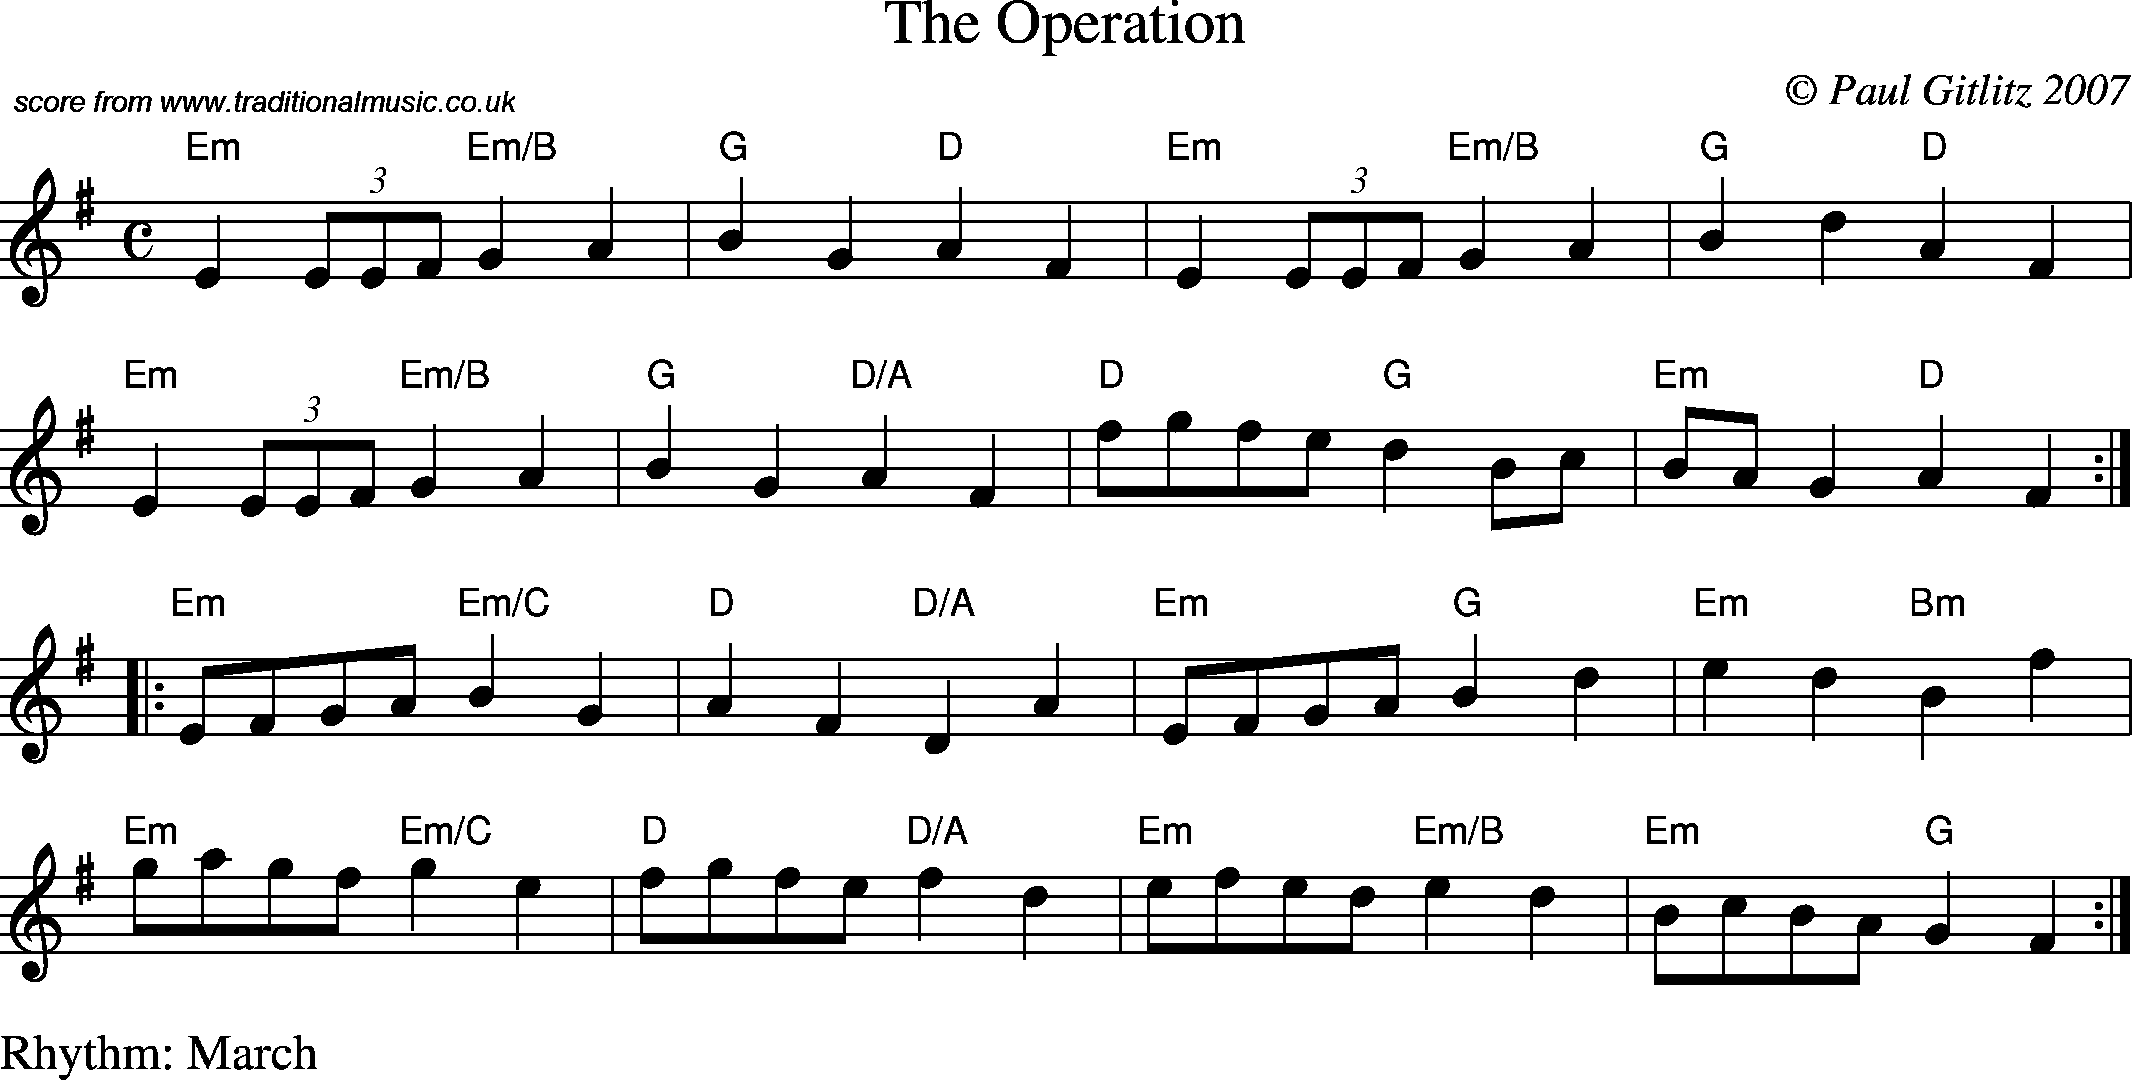 Sheet Music Score for March - The Operation